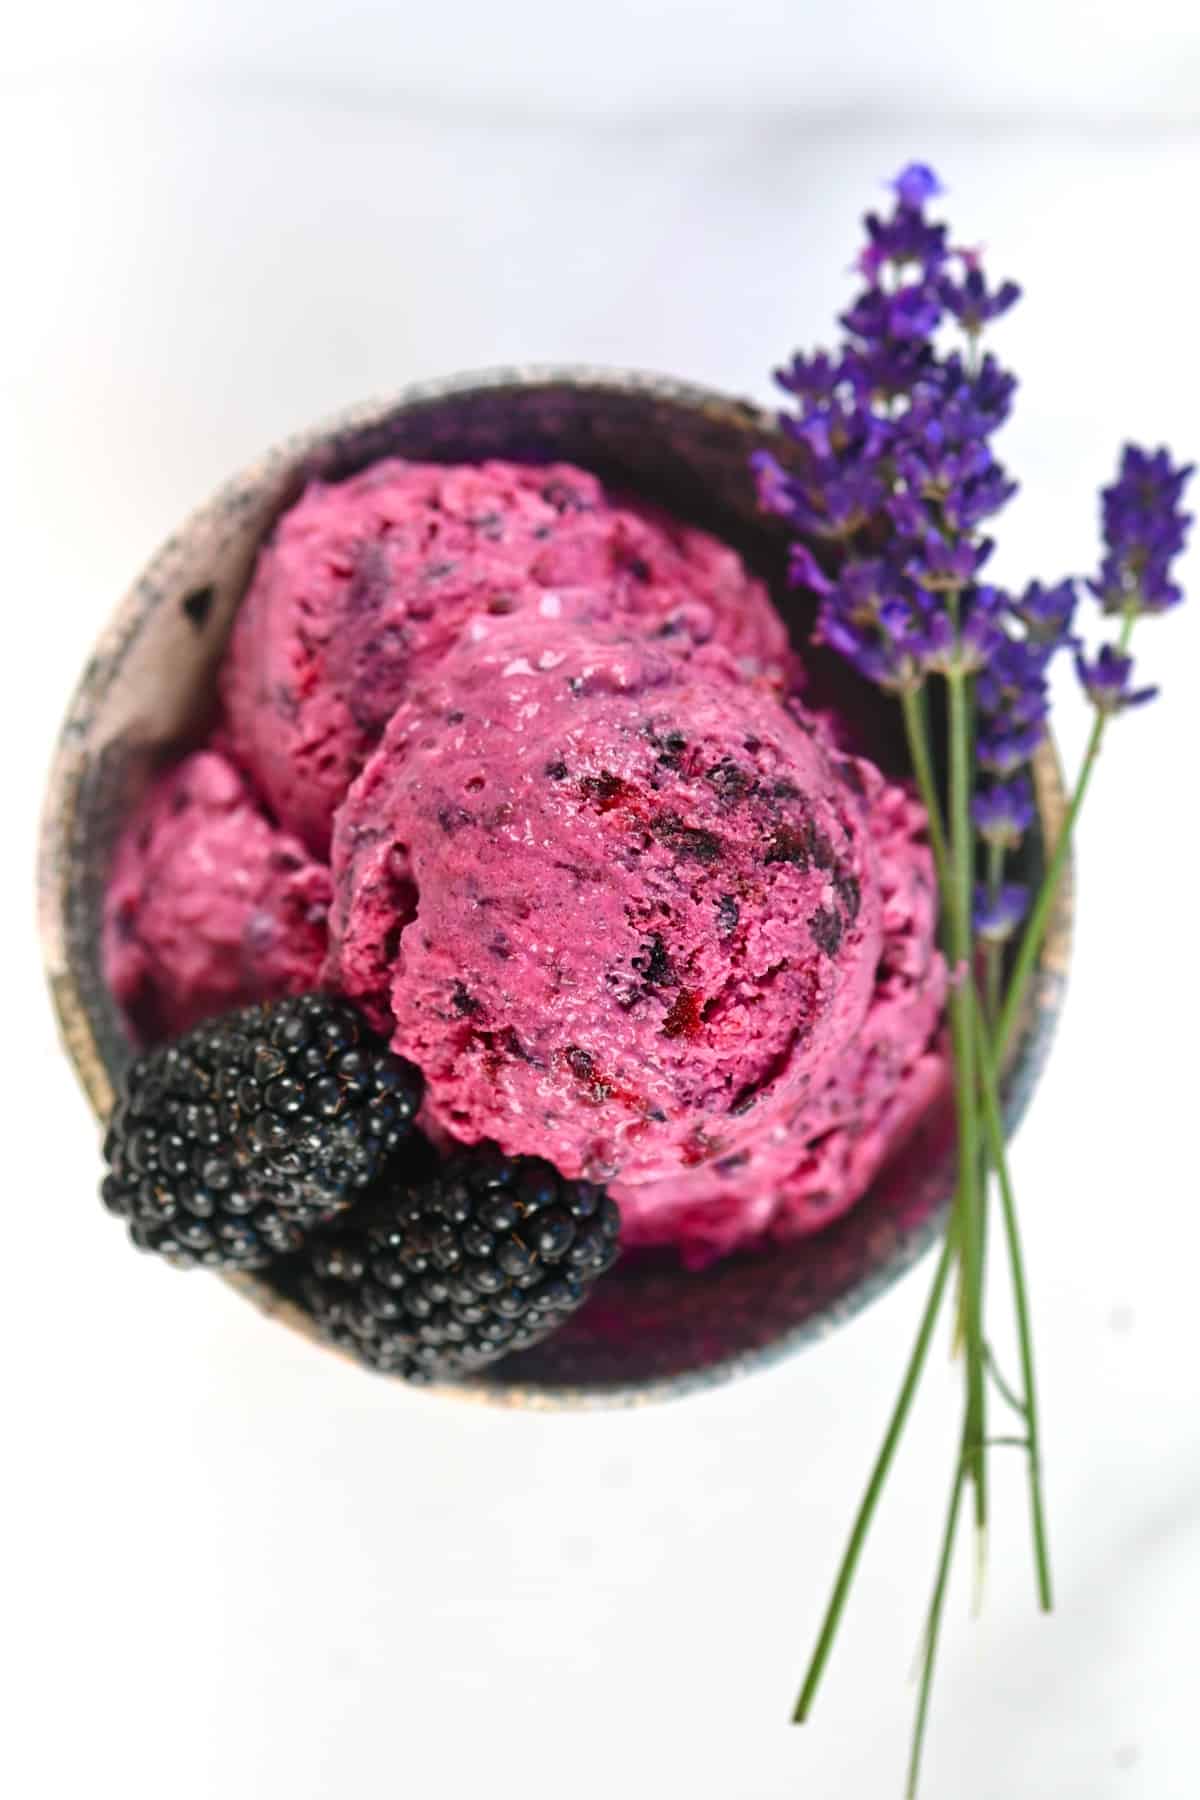 Blackberry Ice Cream scoops in a cup decorated with blackberries and lavender